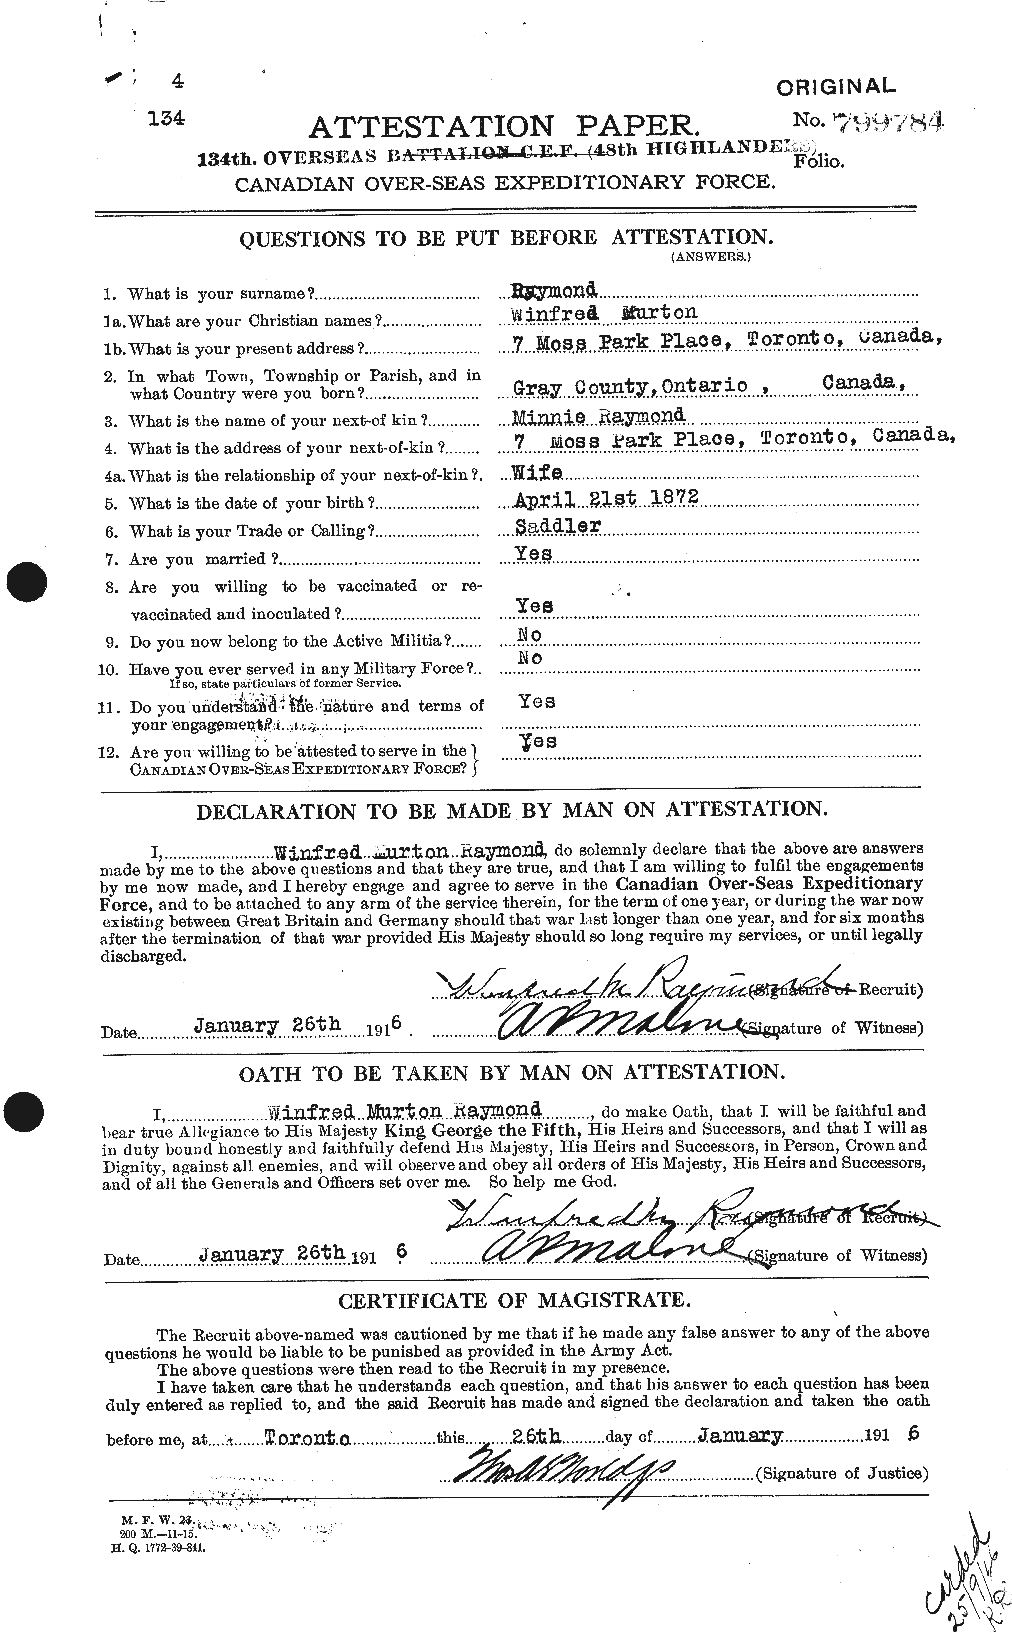 Personnel Records of the First World War - CEF 595478a